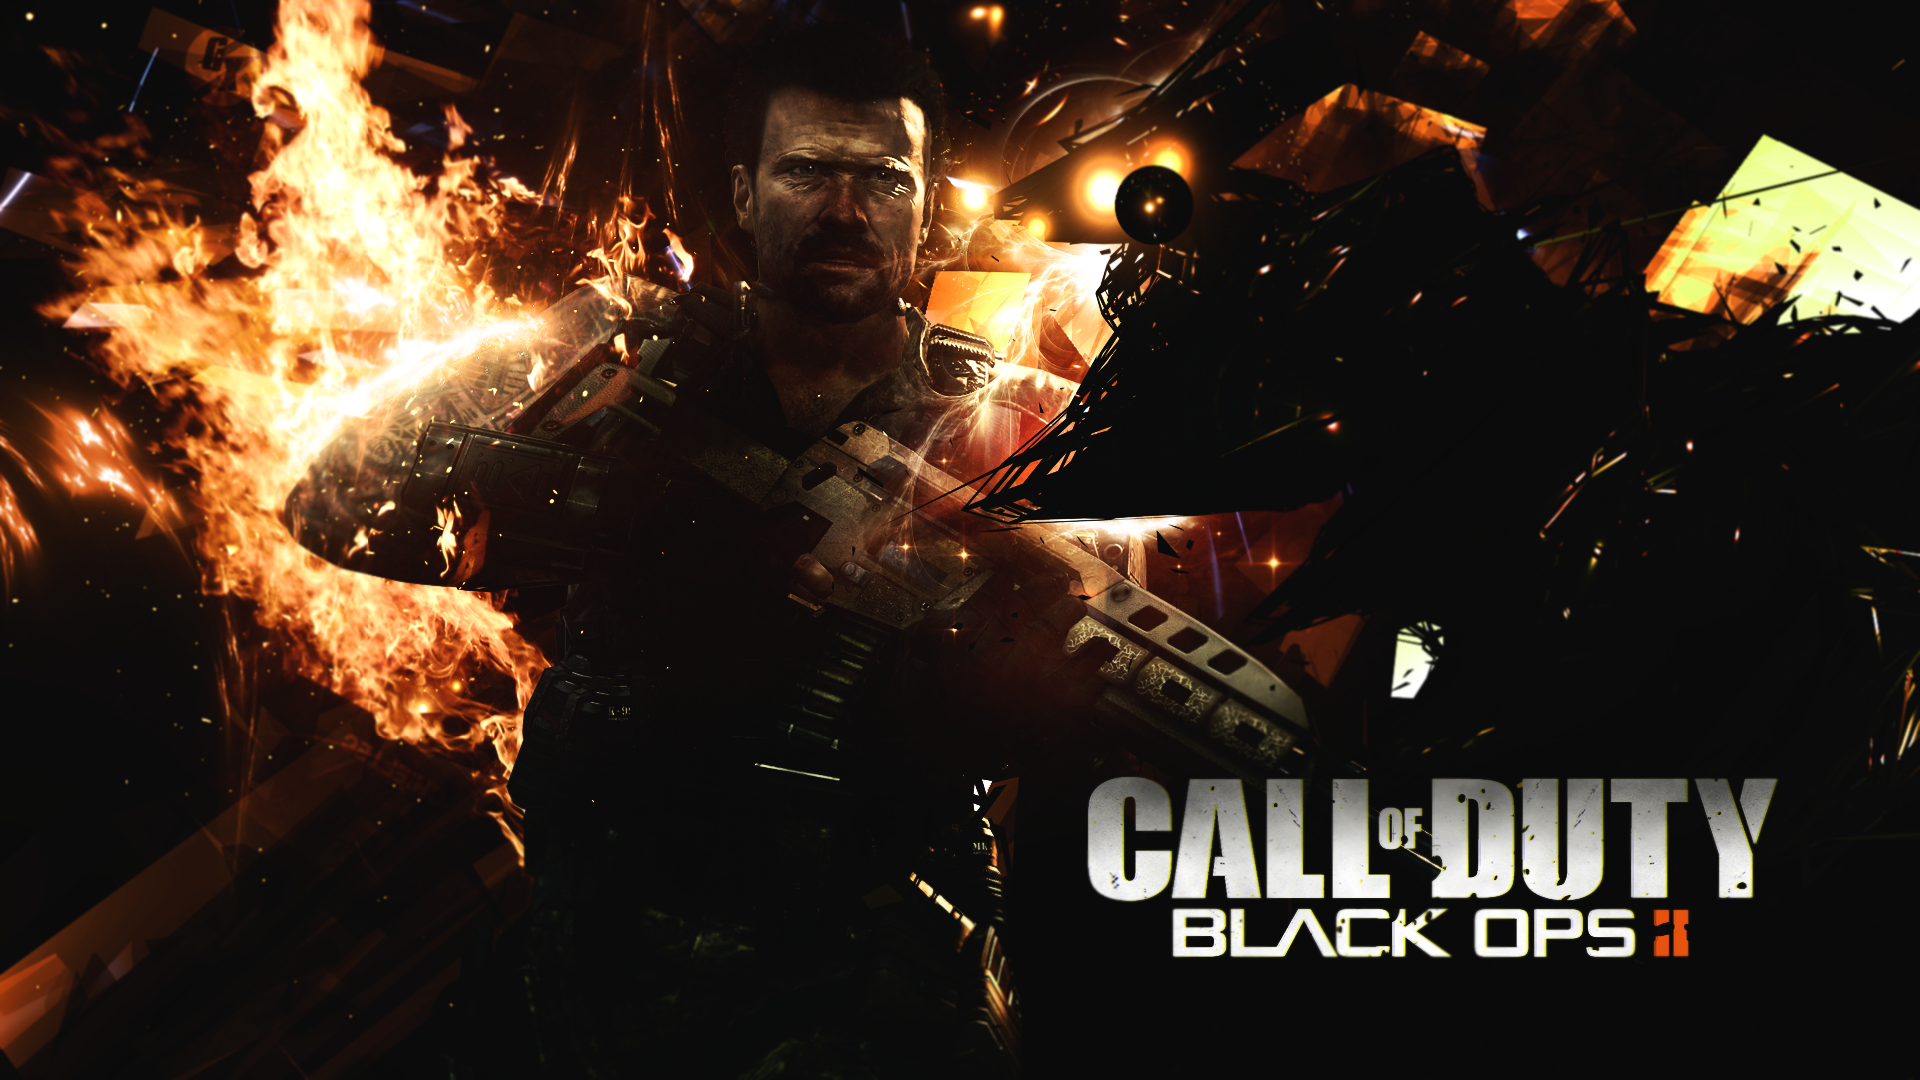 General 1920x1080 Call of Duty: Black Ops Call of Duty: Black Ops II video games dark fire Call of Duty video game art PC gaming video game men weapon men explosion